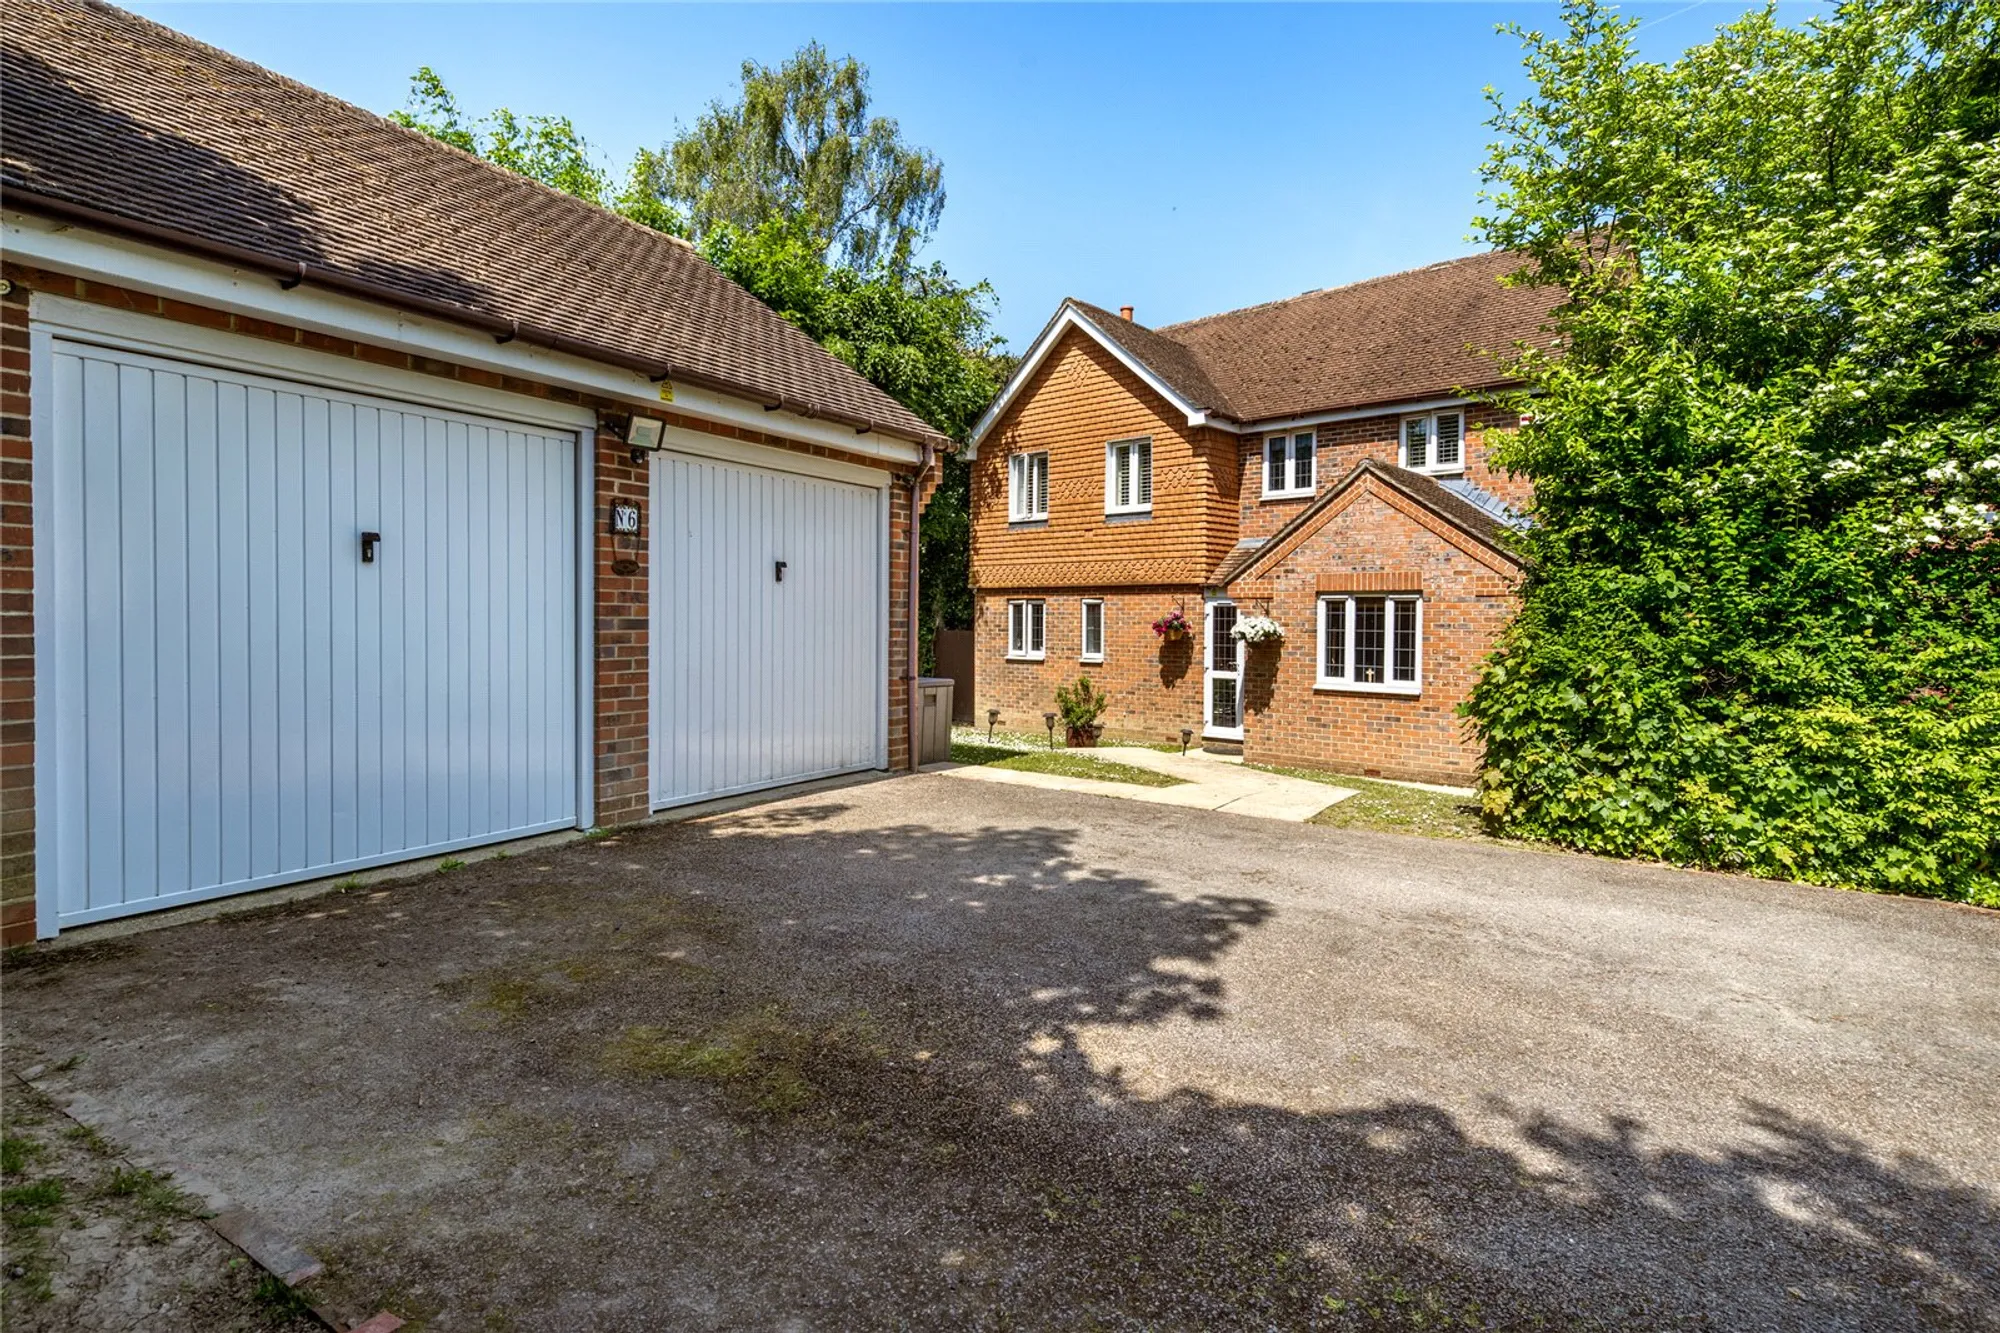 4 bed detached house for sale in Hilldeane Road, Purley  - Property Image 1